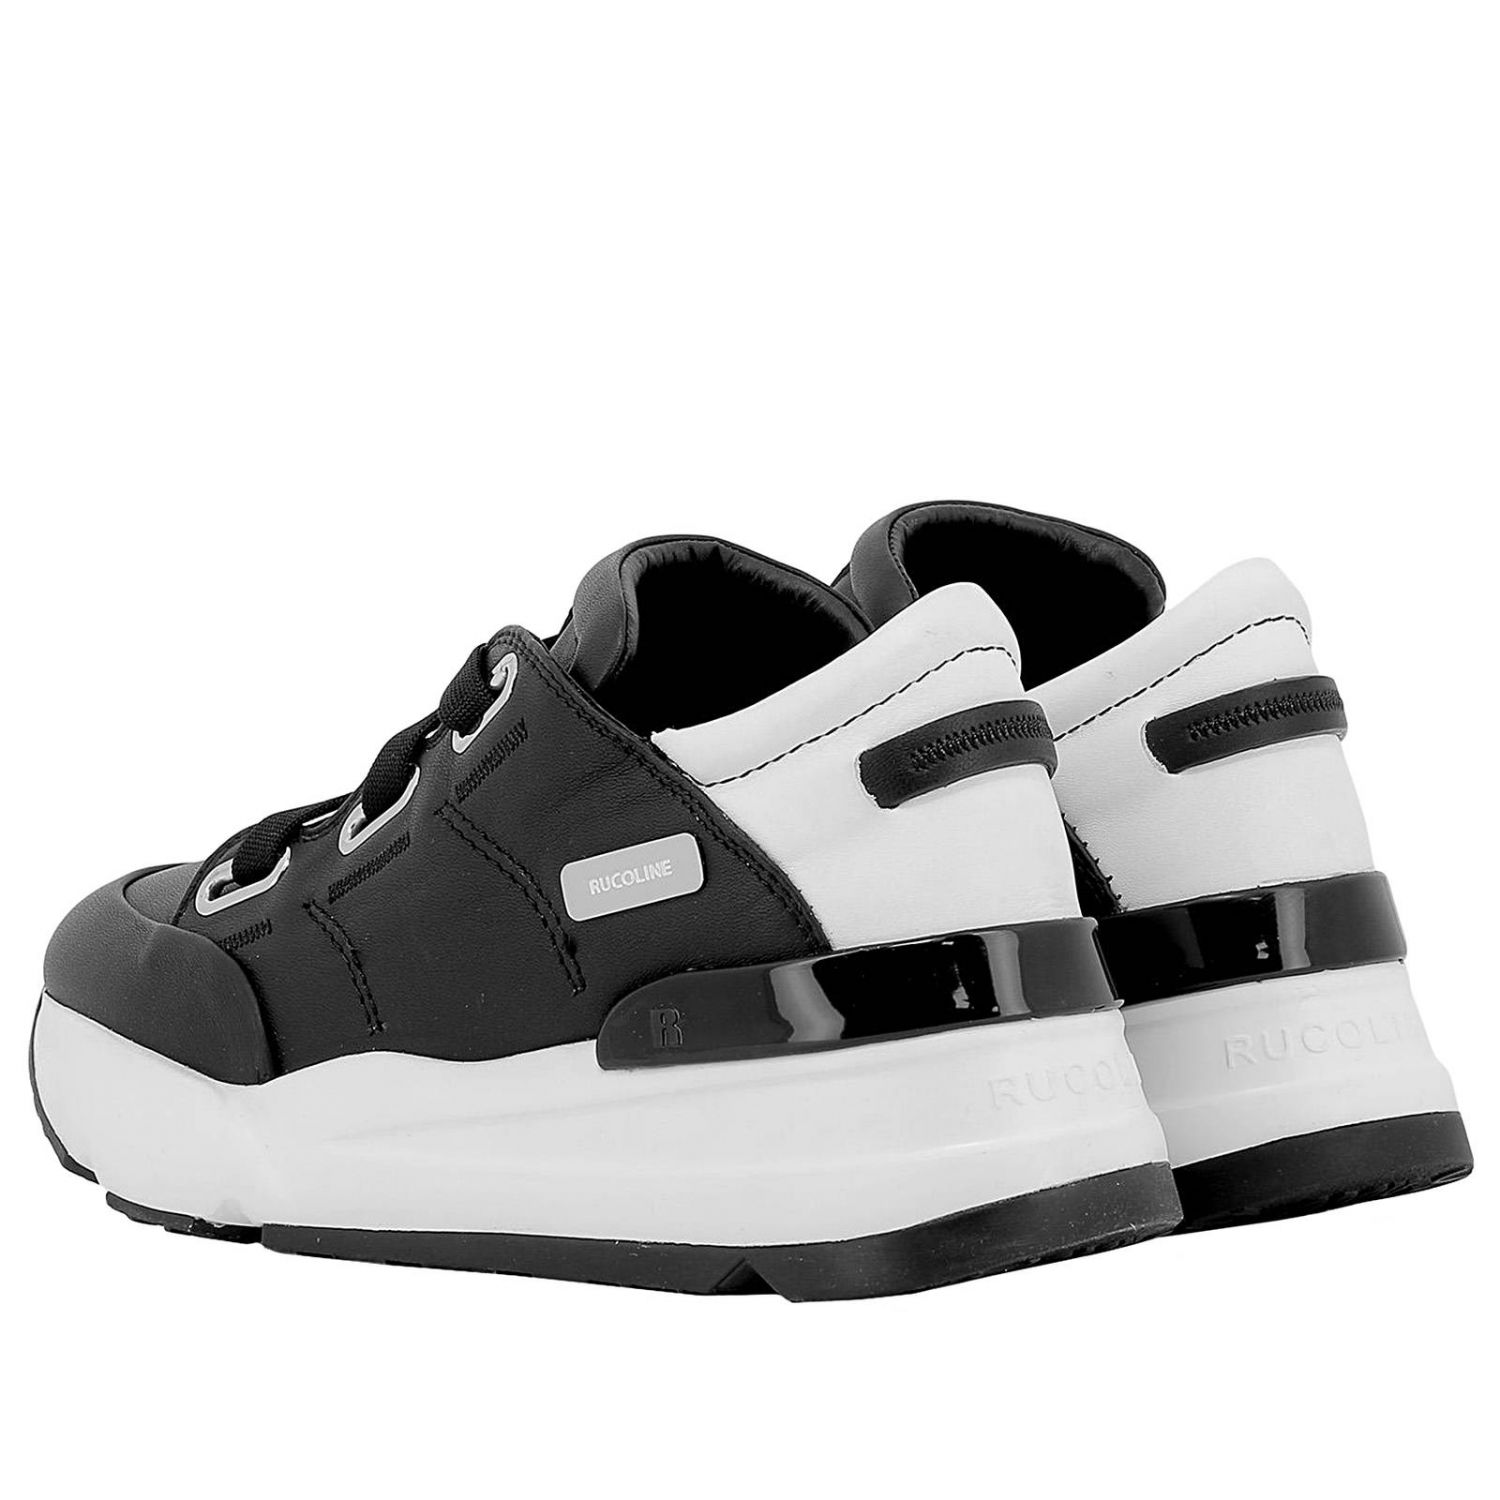 Rucoline Outlet: Sneakers women - Black | Sneakers Rucoline 4038 GIGLIO.COM